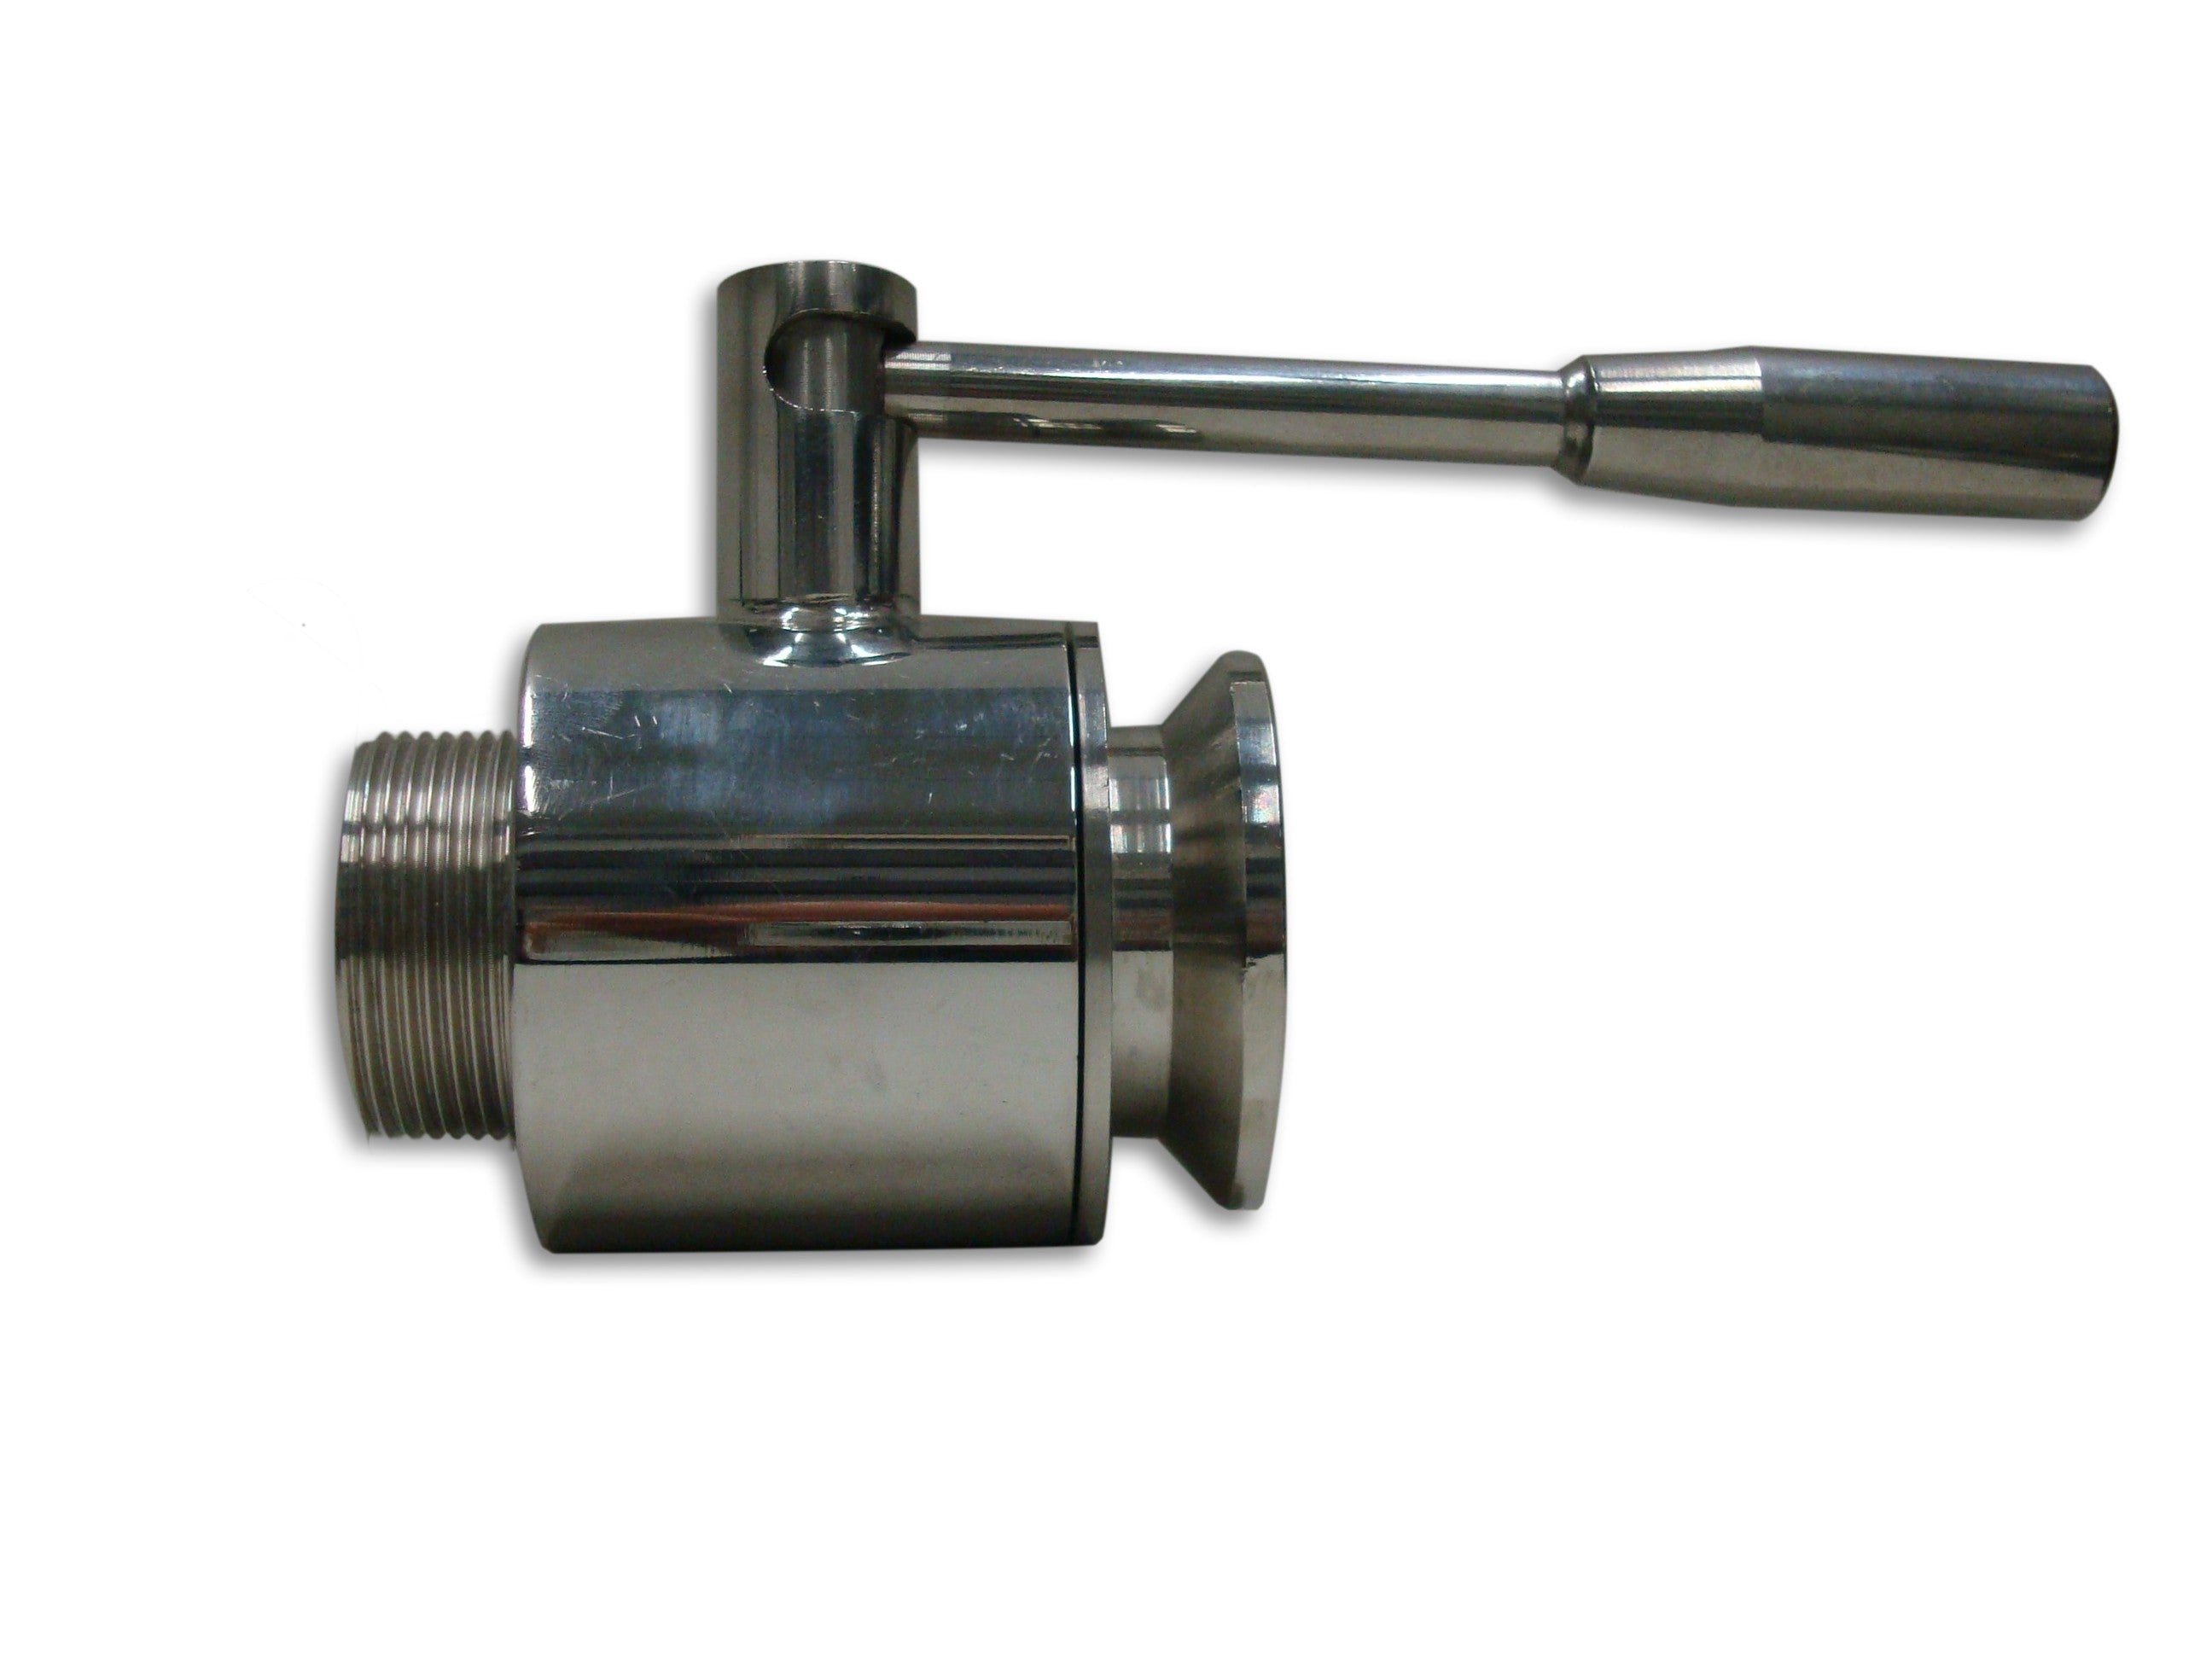 Stainless steel ball valve 1" with connection 50 garolla